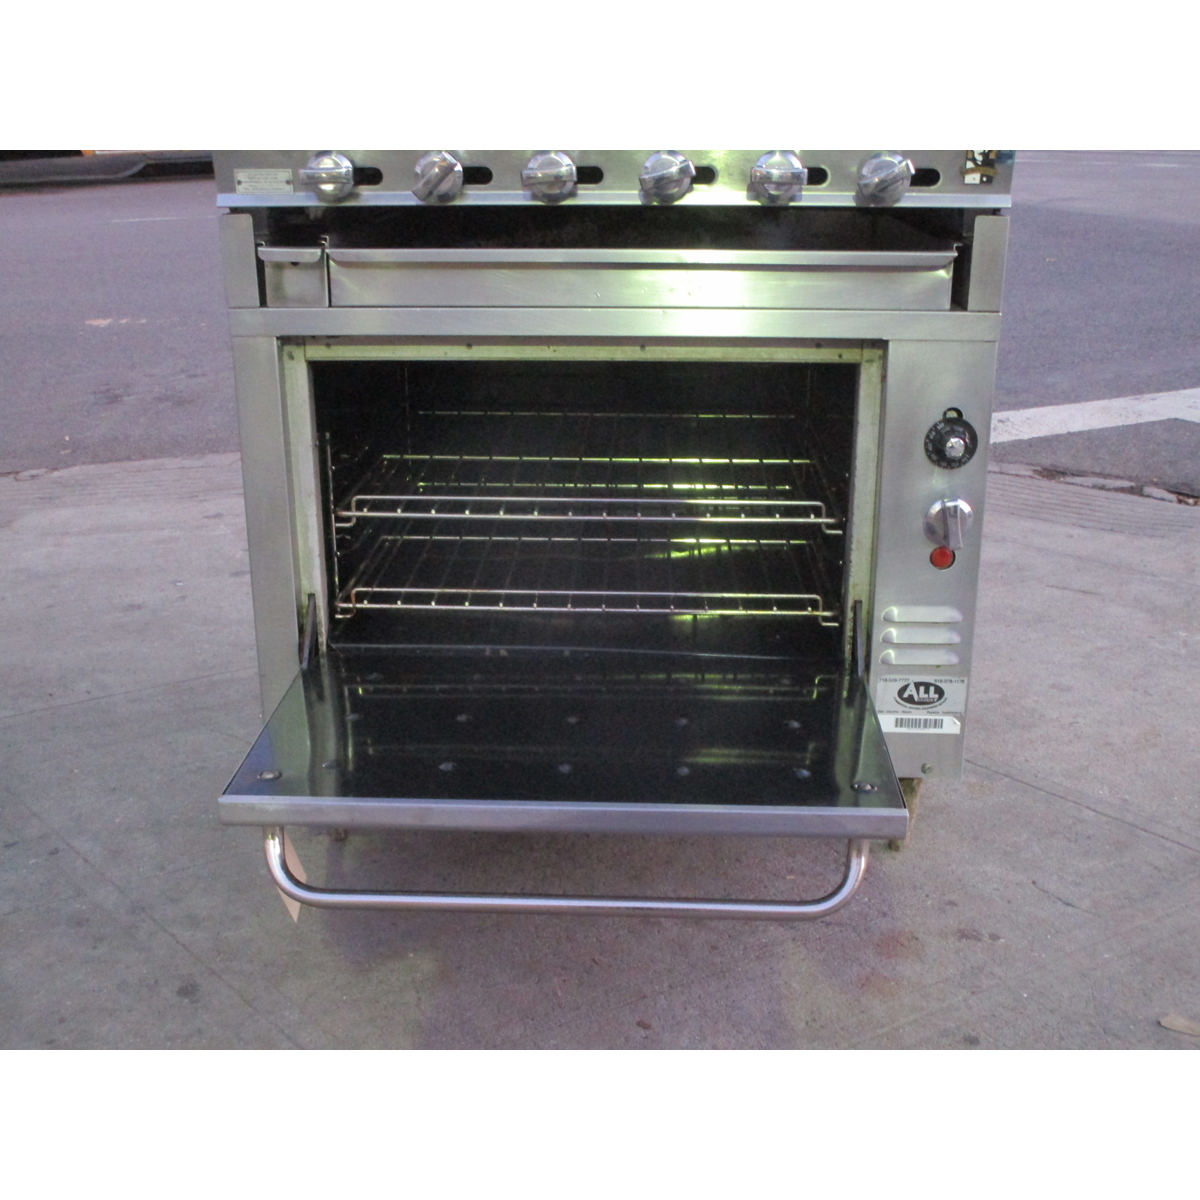 Montague 136XLB/UFLC-36R Oven & Charbroiler Grill, Used Very Good Condition image 3